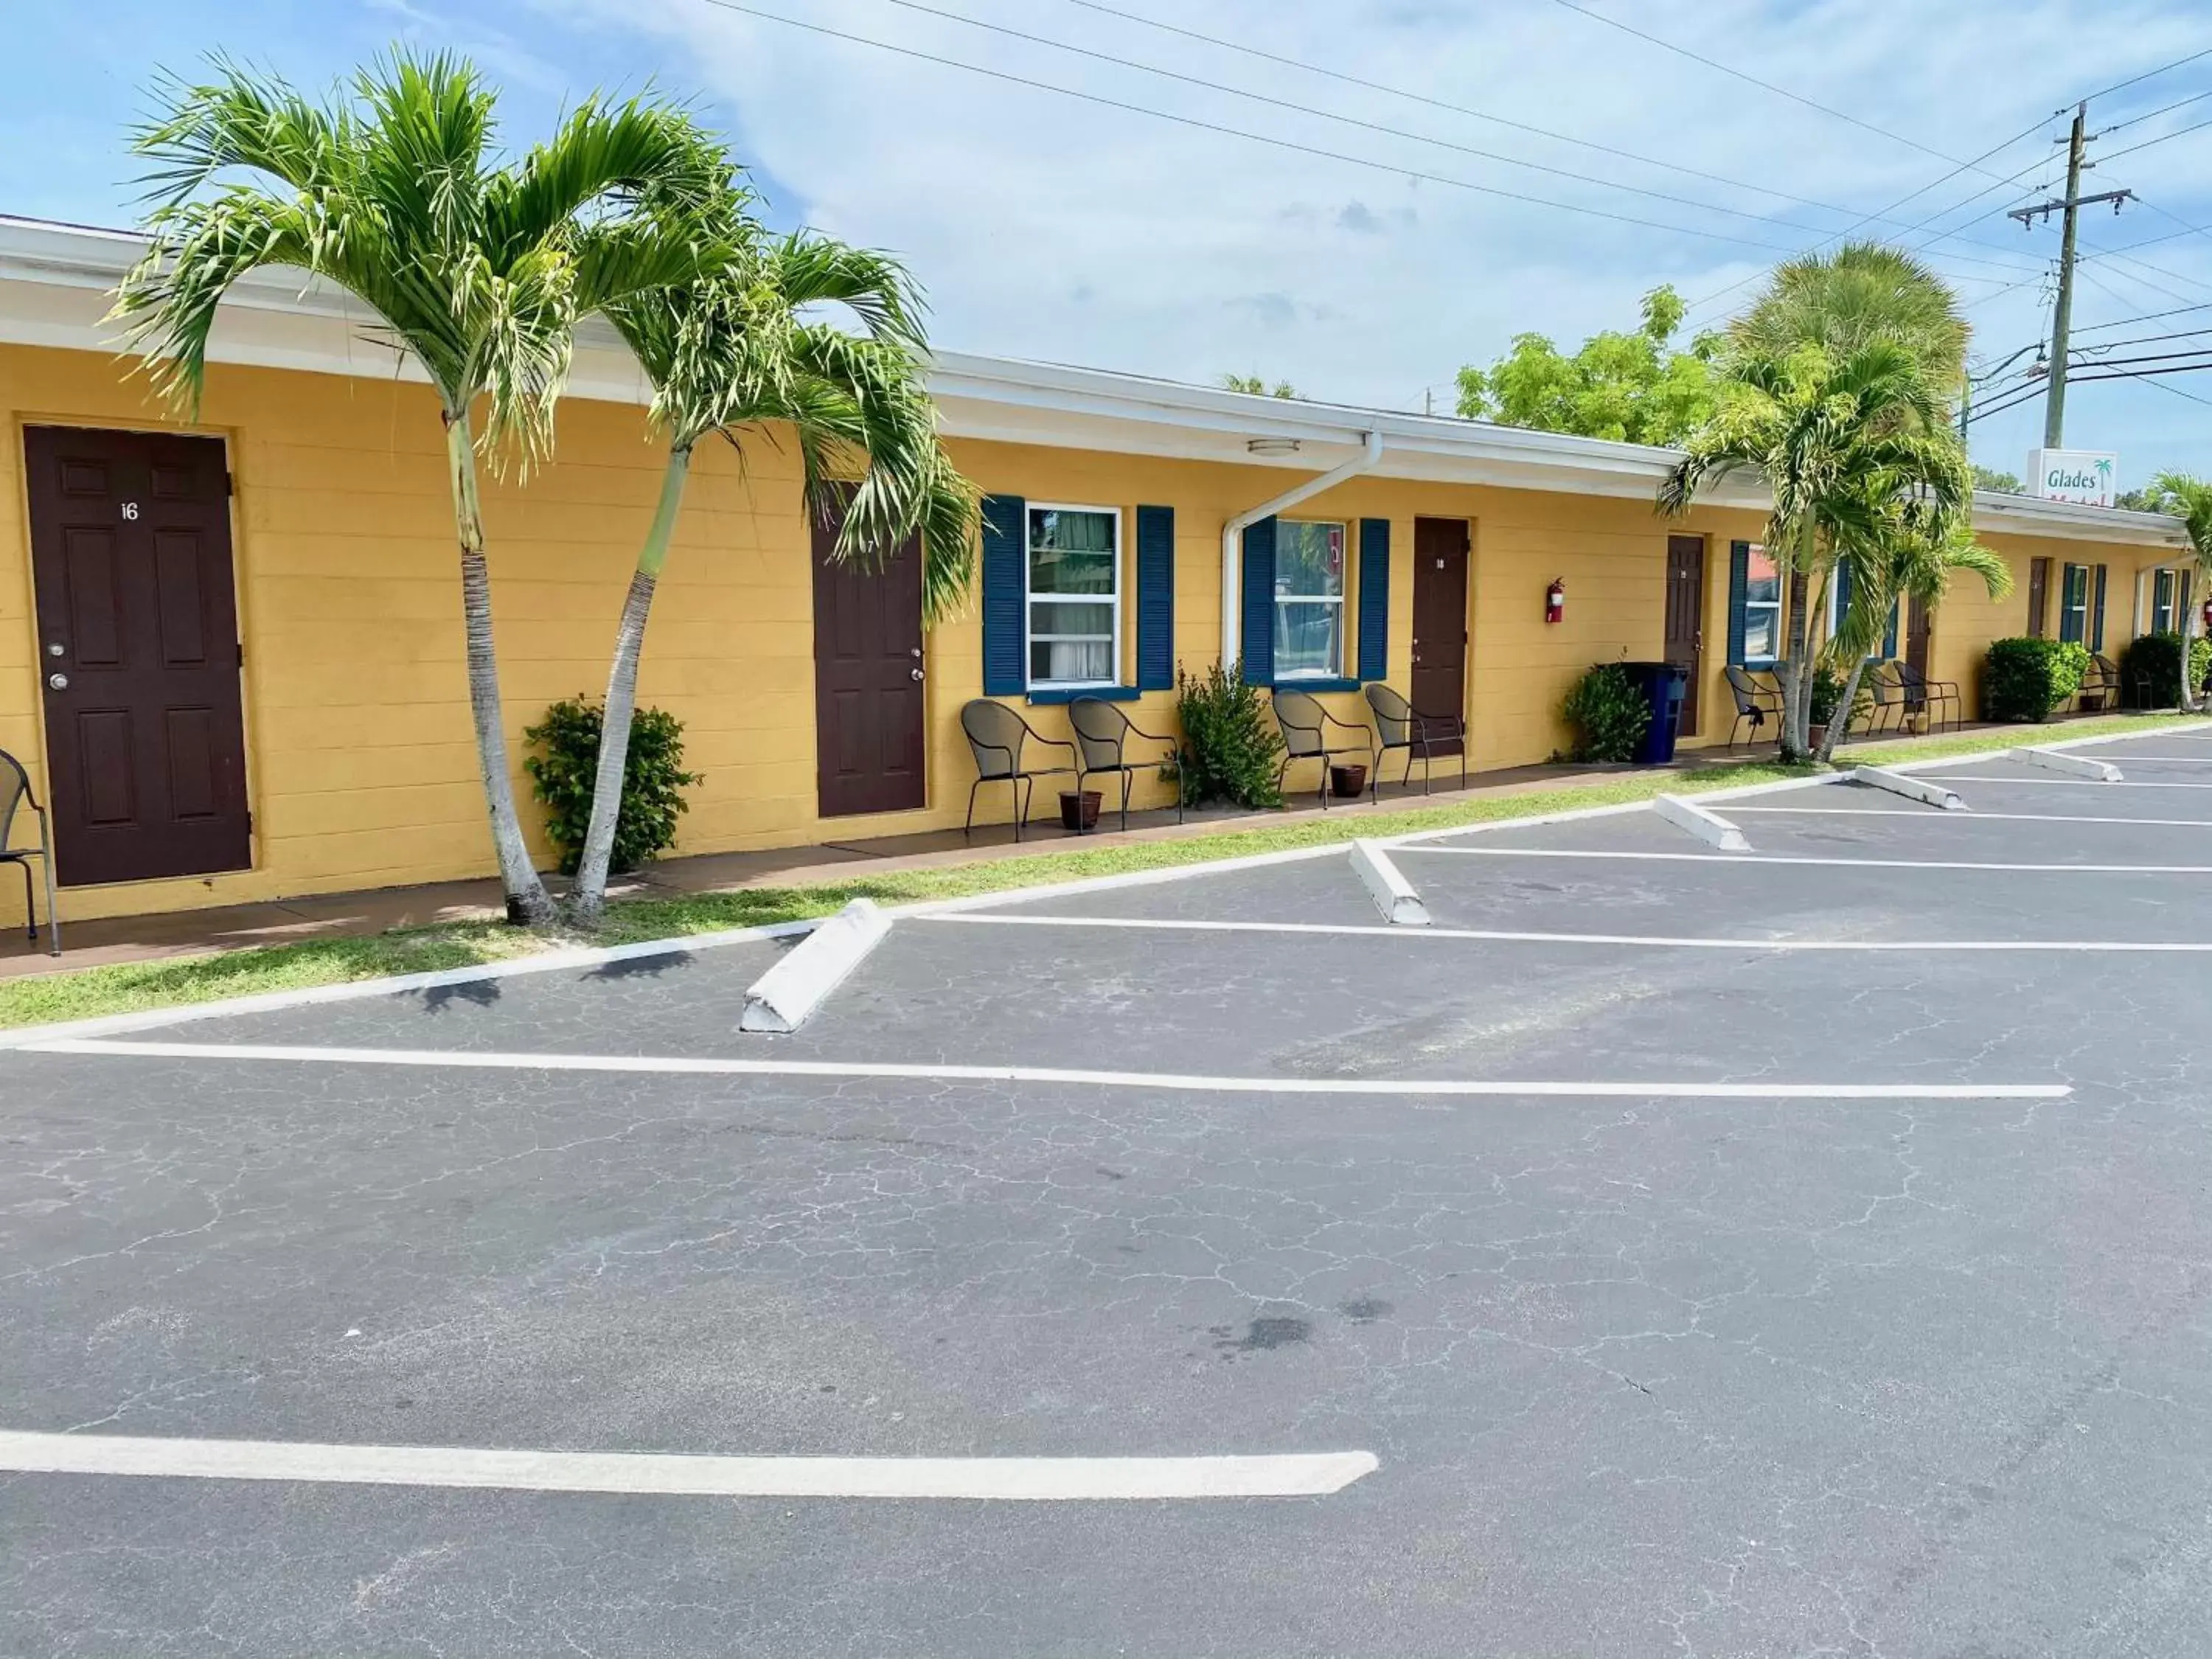 Other, Property Building in Glades Motel - Naples